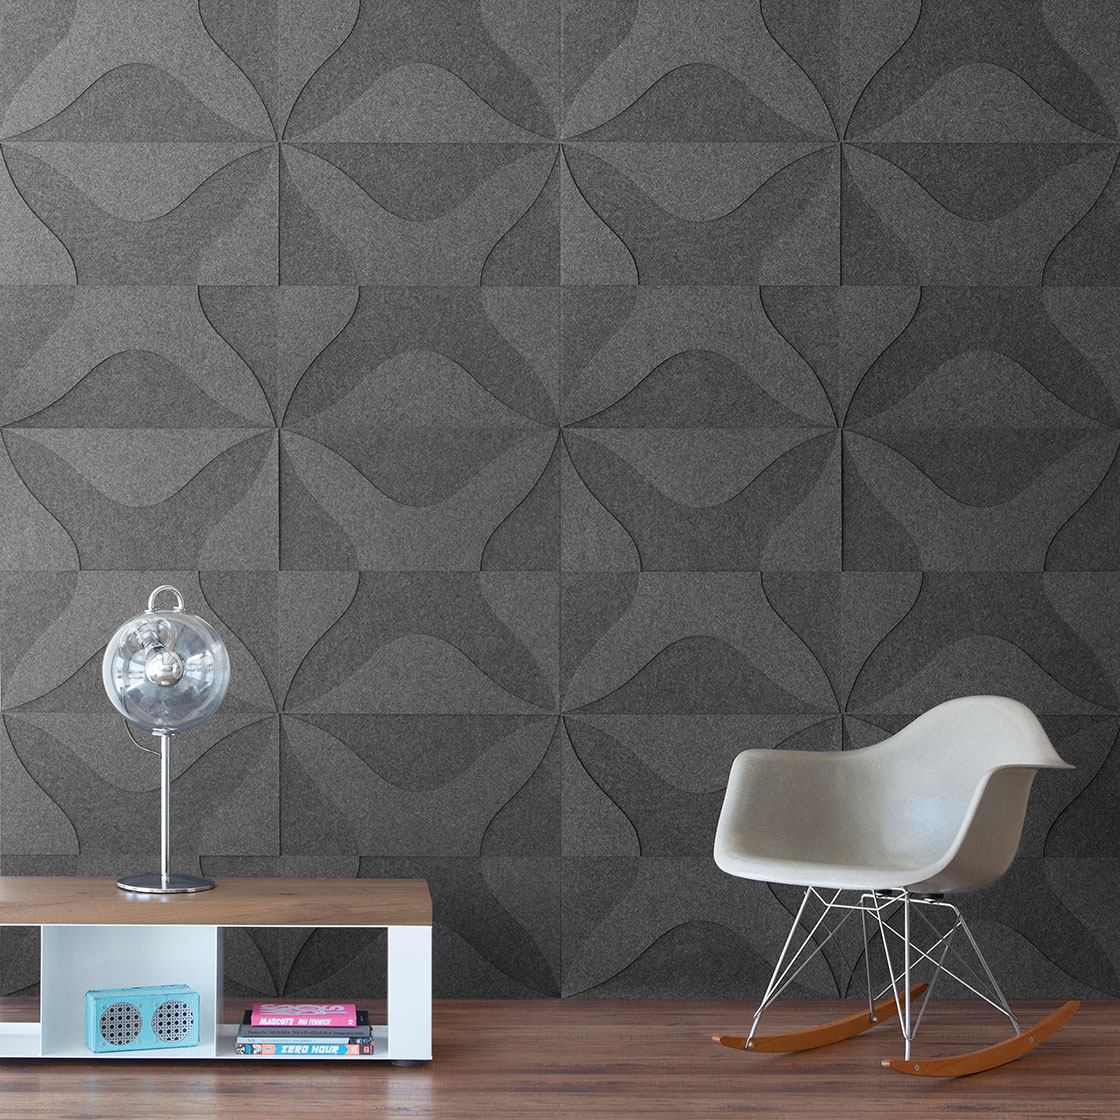 A room scene with a low table and Eames rocking chair. The wall is covered in a two tone gray felt wall covering. The pattern is a thick X